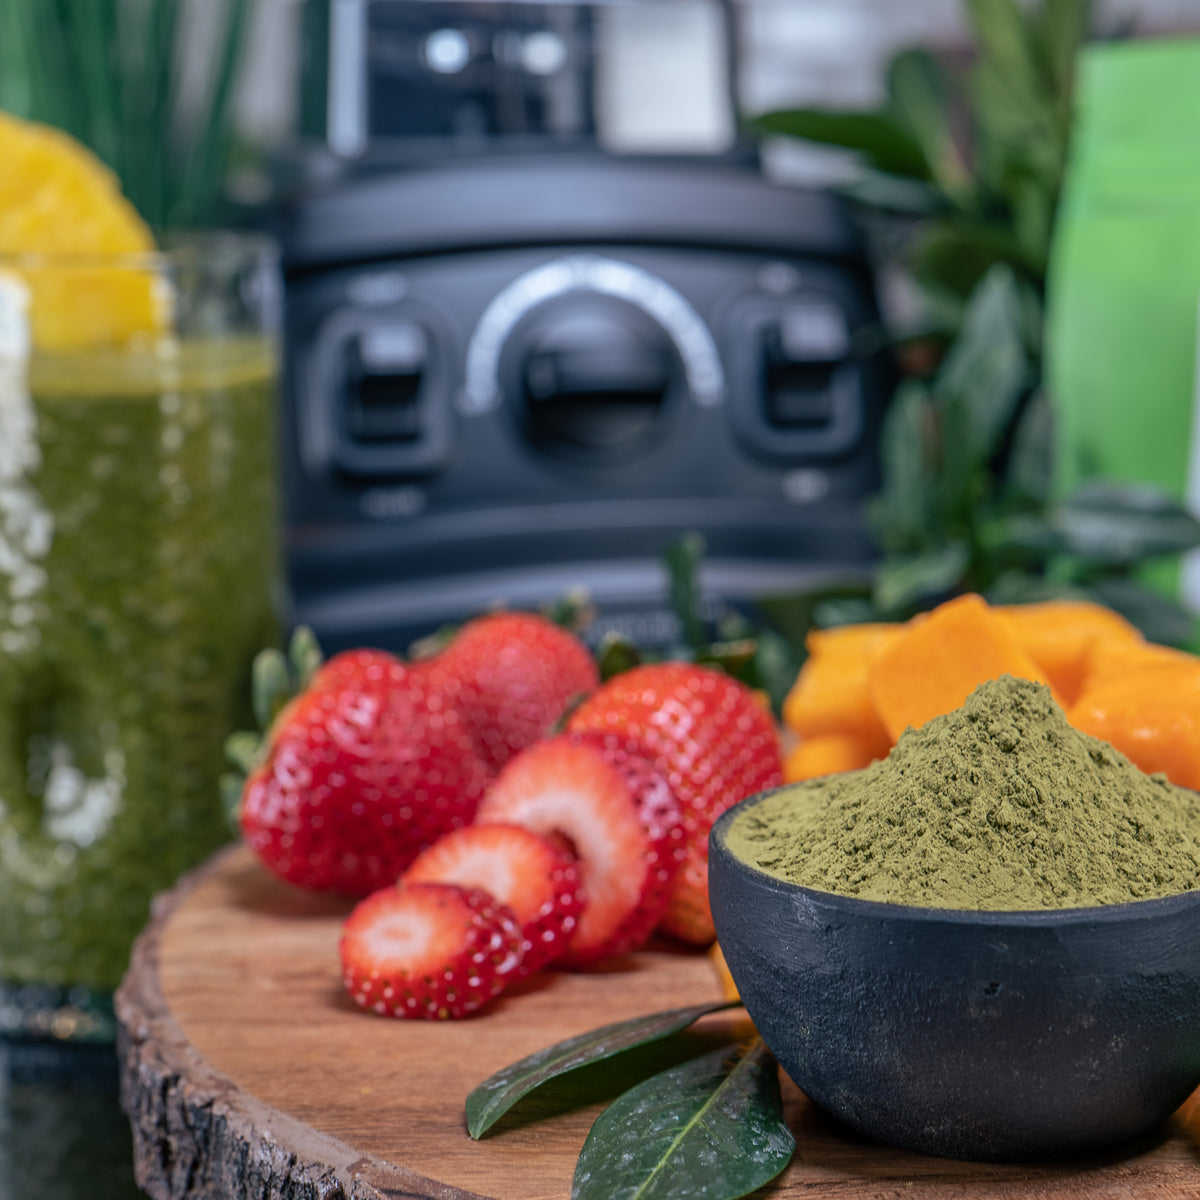 Lifestyle photo, Brandless Pro-blender in background, matcha powder in bowl, surrounded by other smoothie ingredients like strawberries, basil, squash.